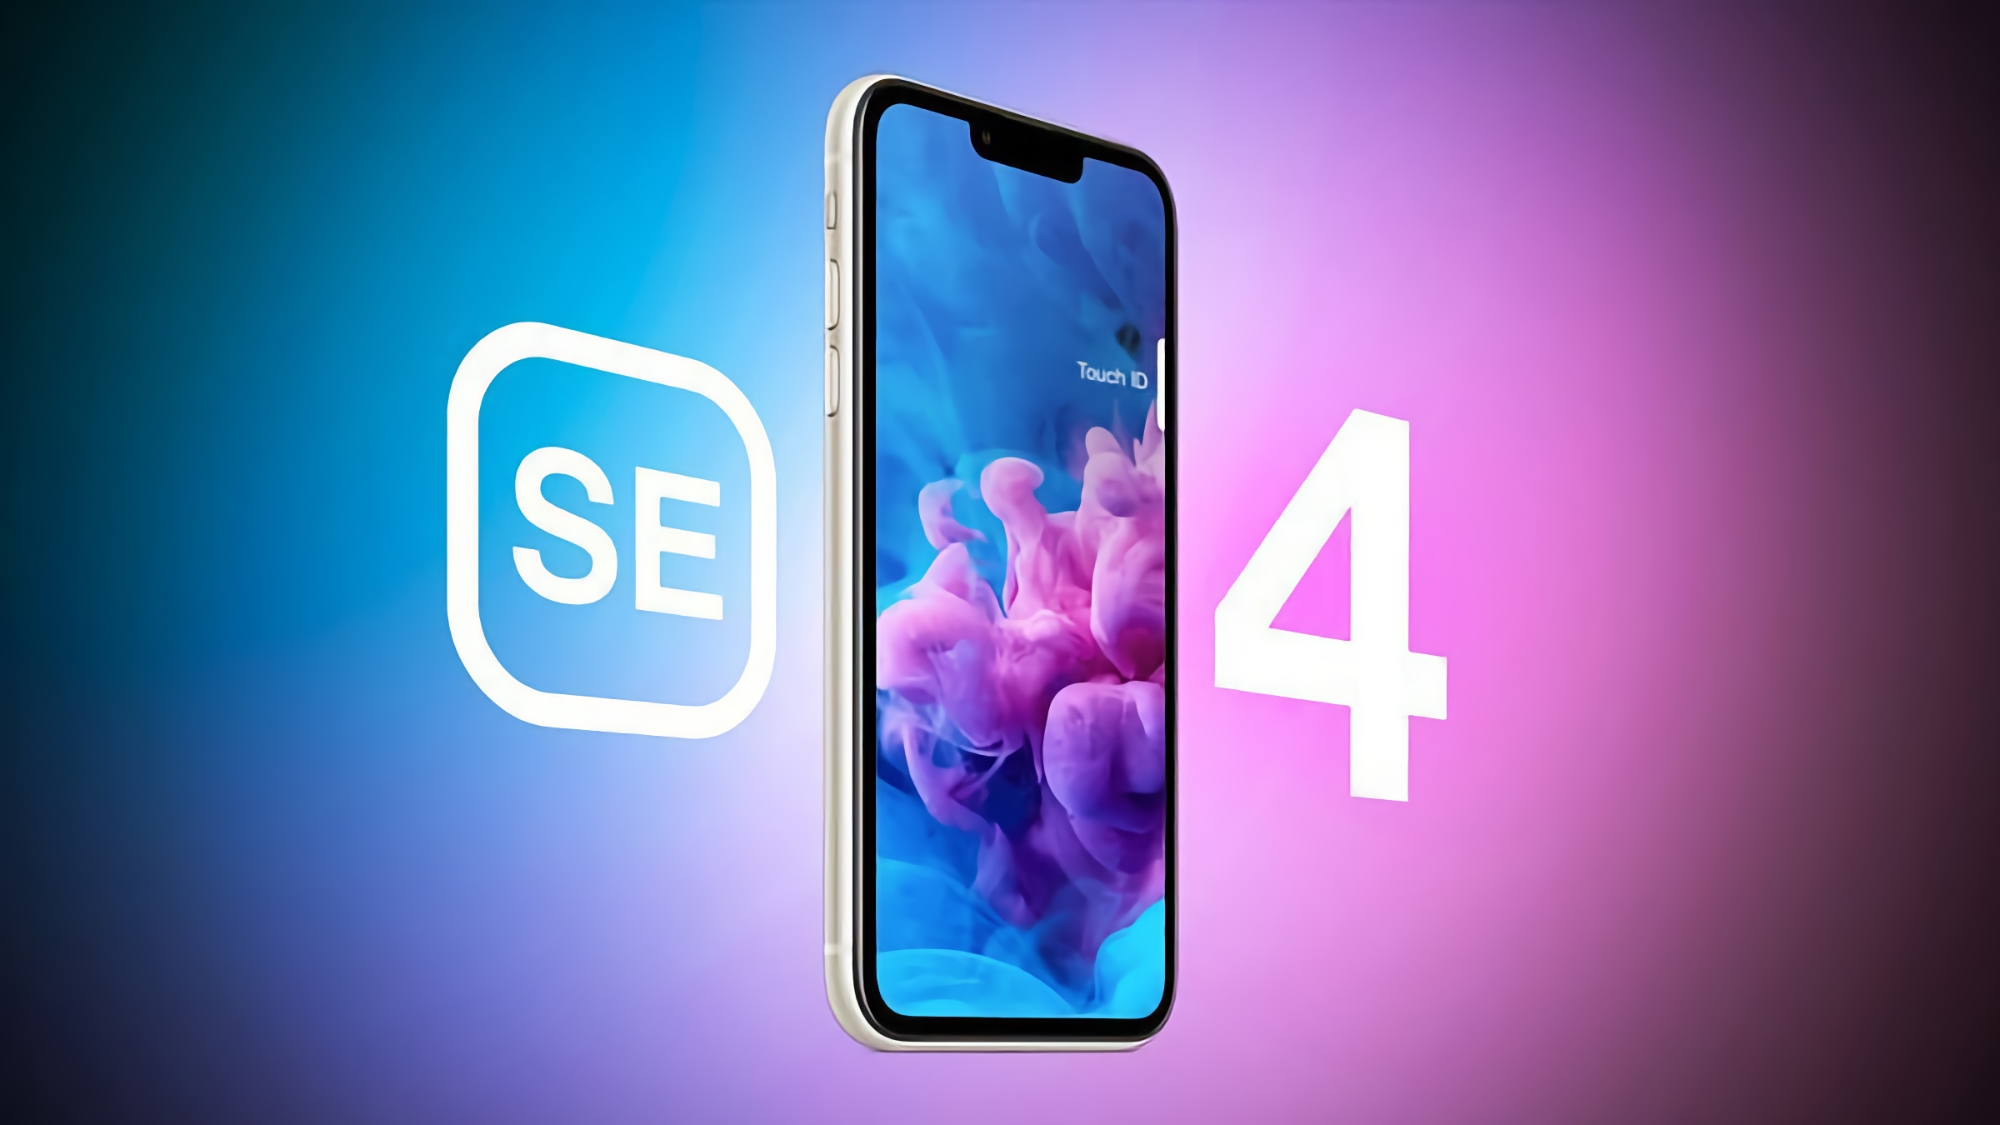 Like the iPhone XR and iPhone 11: The fourth-generation iPhone SE will get a 6.1-inch LCD display with a monobrow